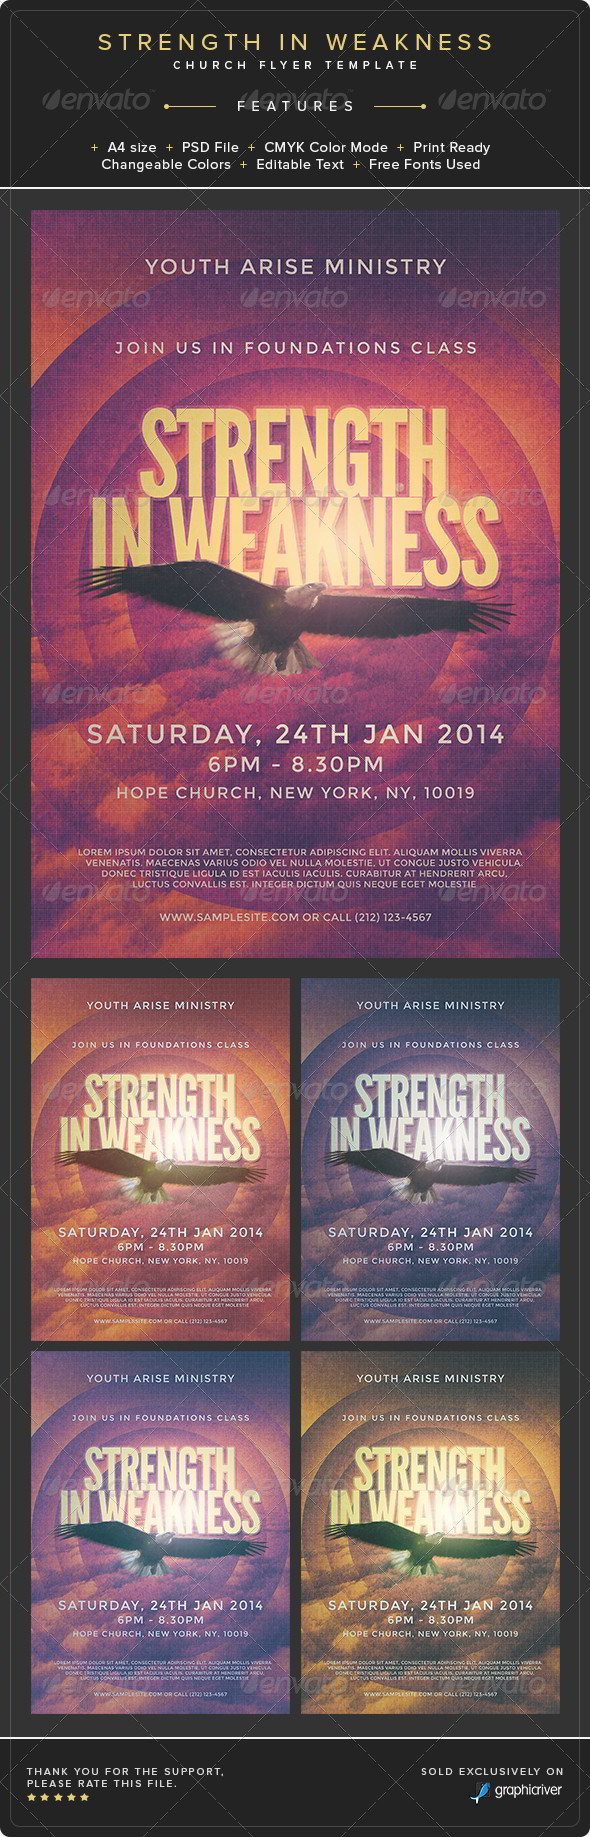 Strength in weakness church flyer template preview